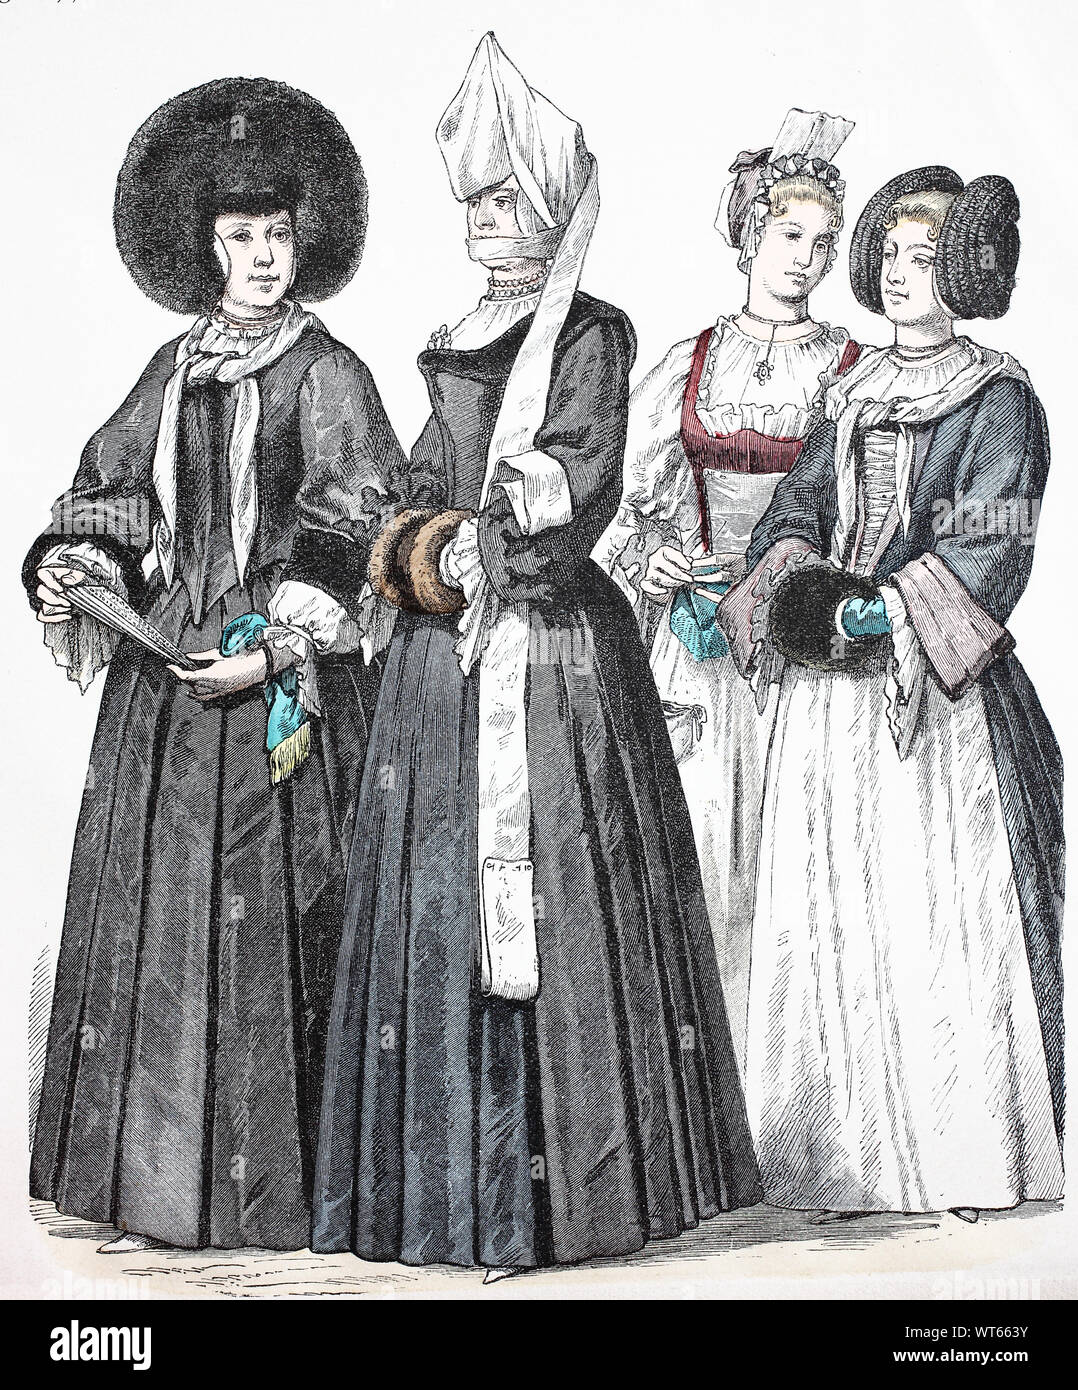 National costume, clothes, history of the costumes, women's national  costume with honourary occasions, noble woman in grief, lady's national  costume in the house, lady's national costume with rose cap, Switzerland,  at the